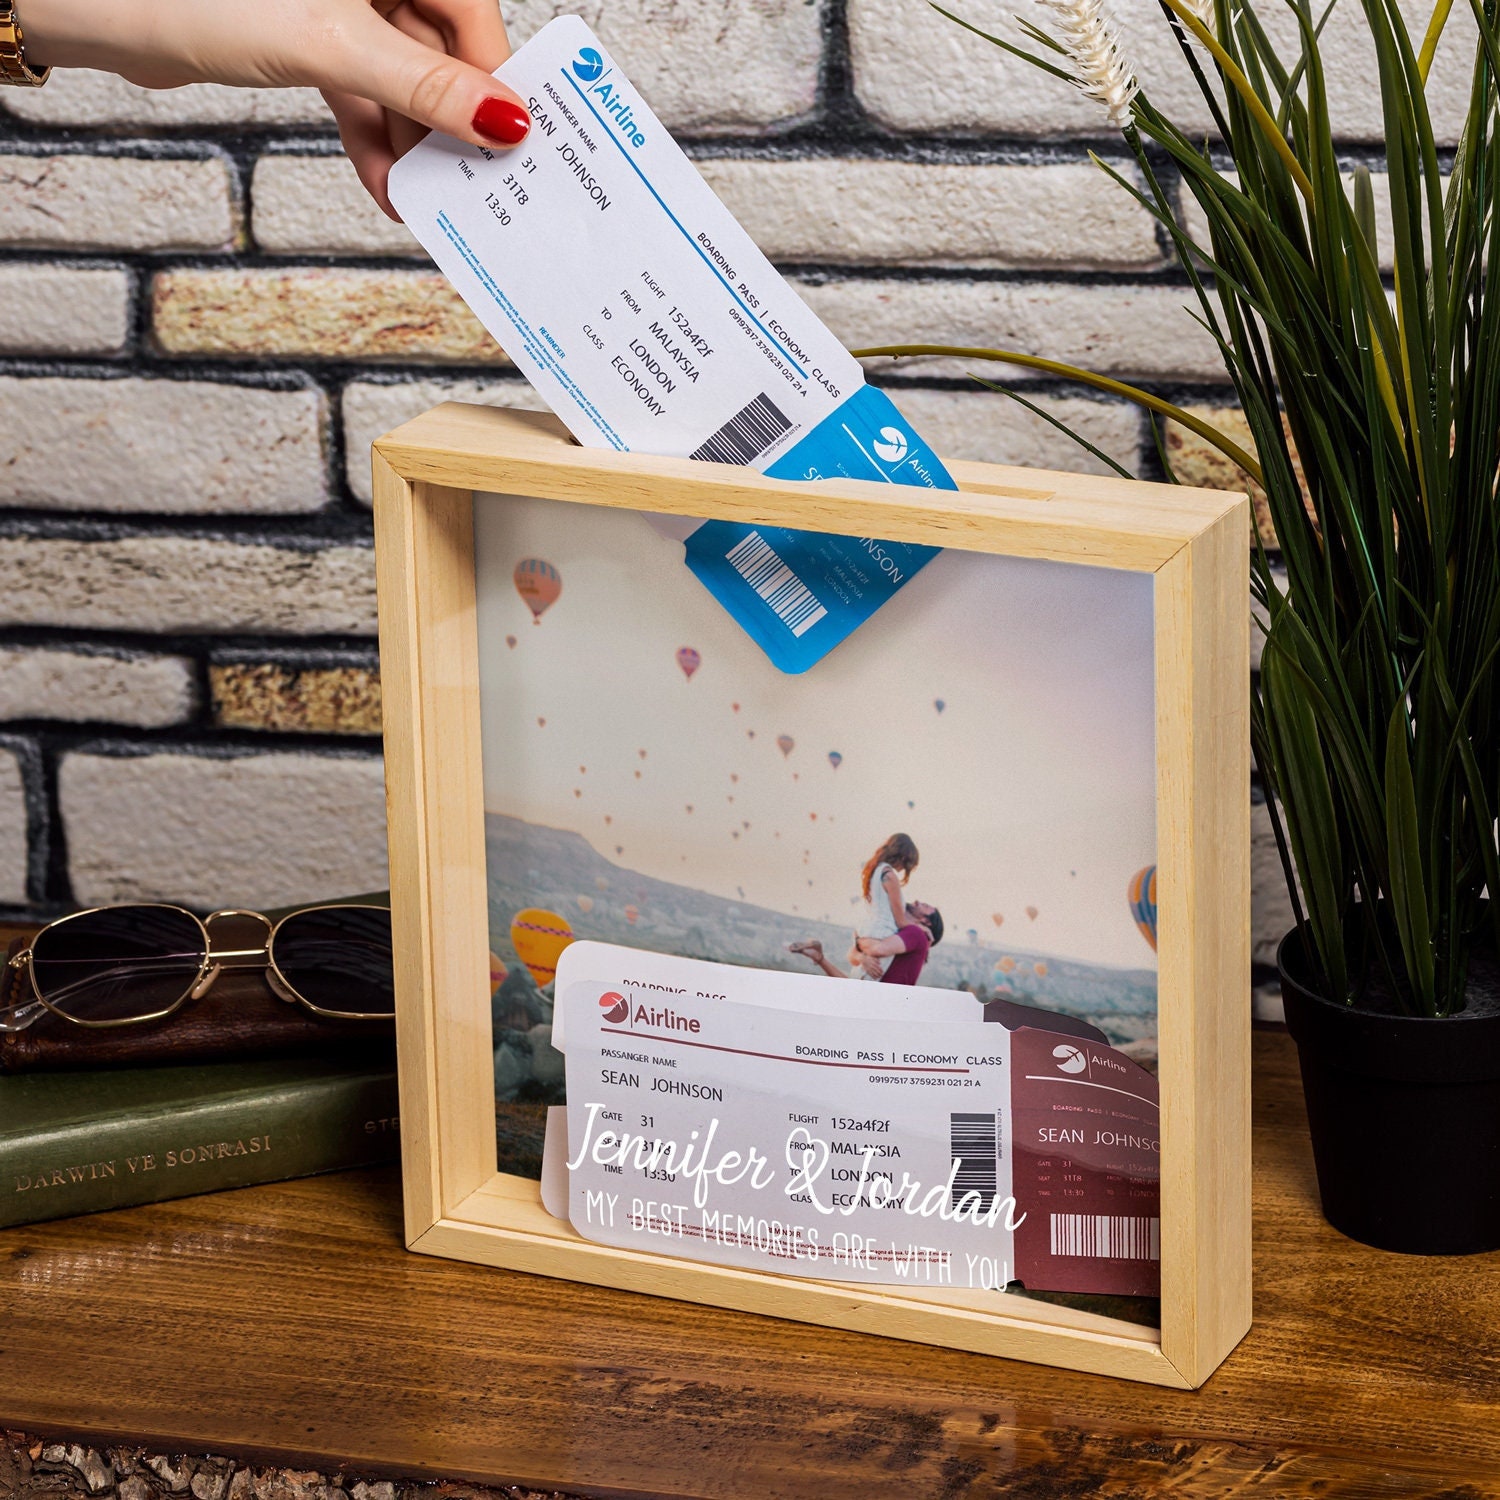 Buy Adventure Archive Box Ticket Shadow Box with Slot -S Online